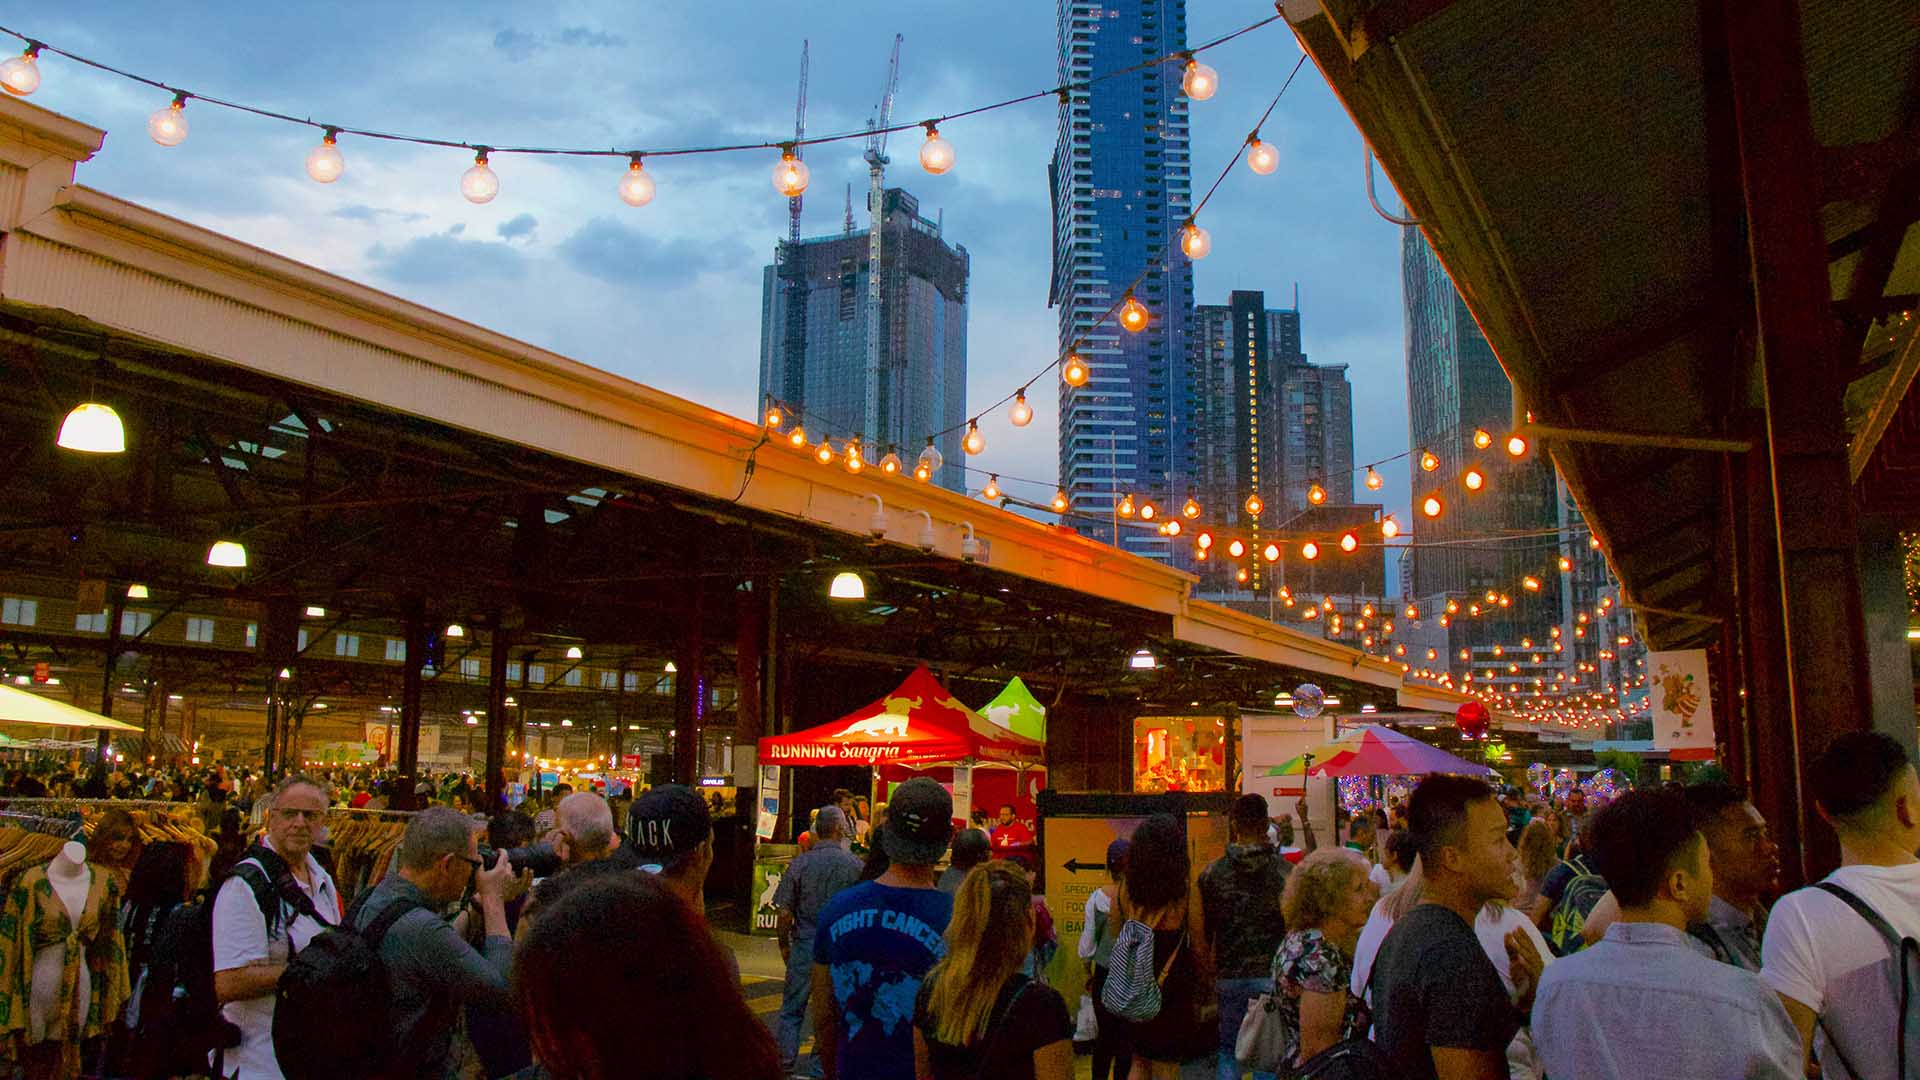 The Best Christmas Markets in Melbourne for Presents, Produce and Festive Feels